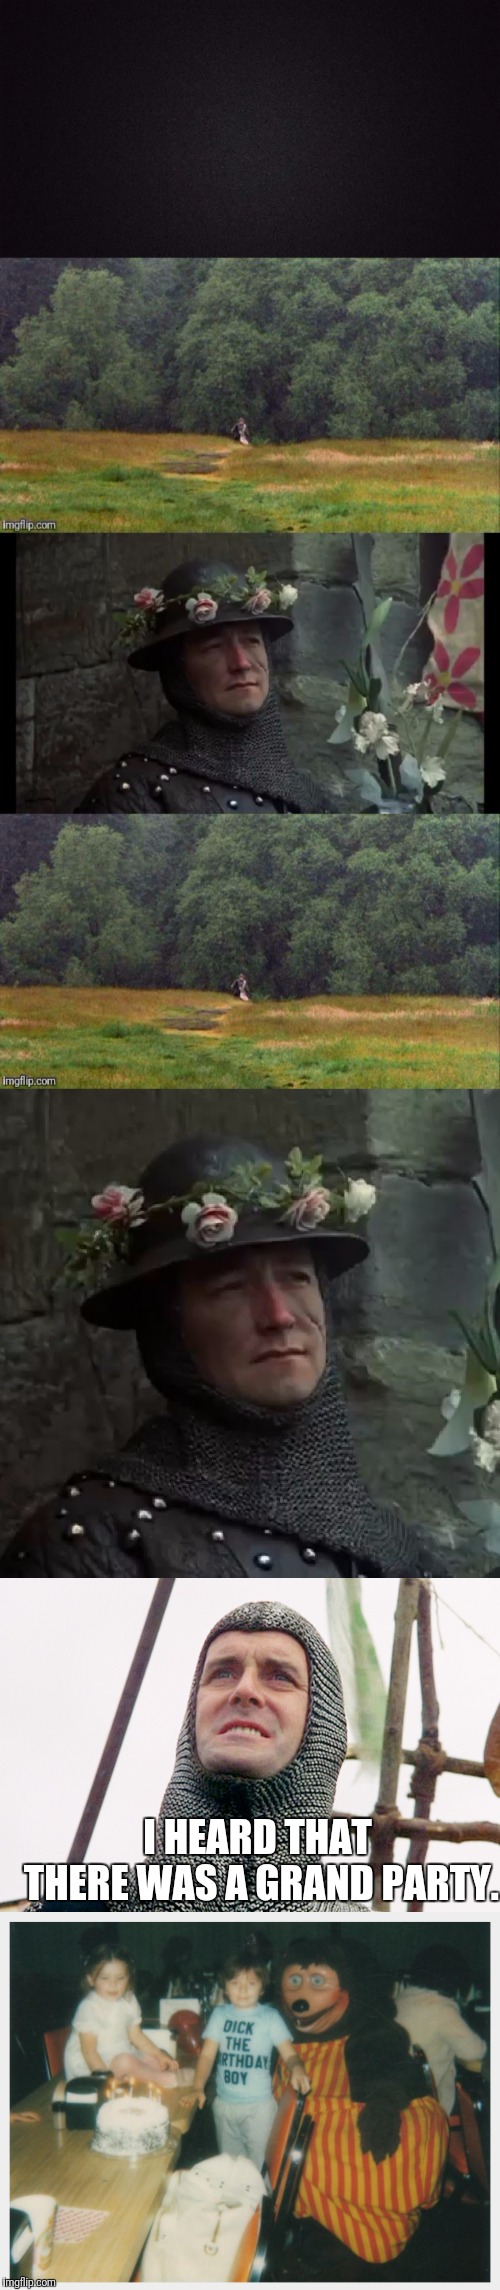 The Rich Party | I HEARD THAT THERE WAS A GRAND PARTY. | image tagged in monty python and the holy grail,john cleese,holy grail,monty python | made w/ Imgflip meme maker